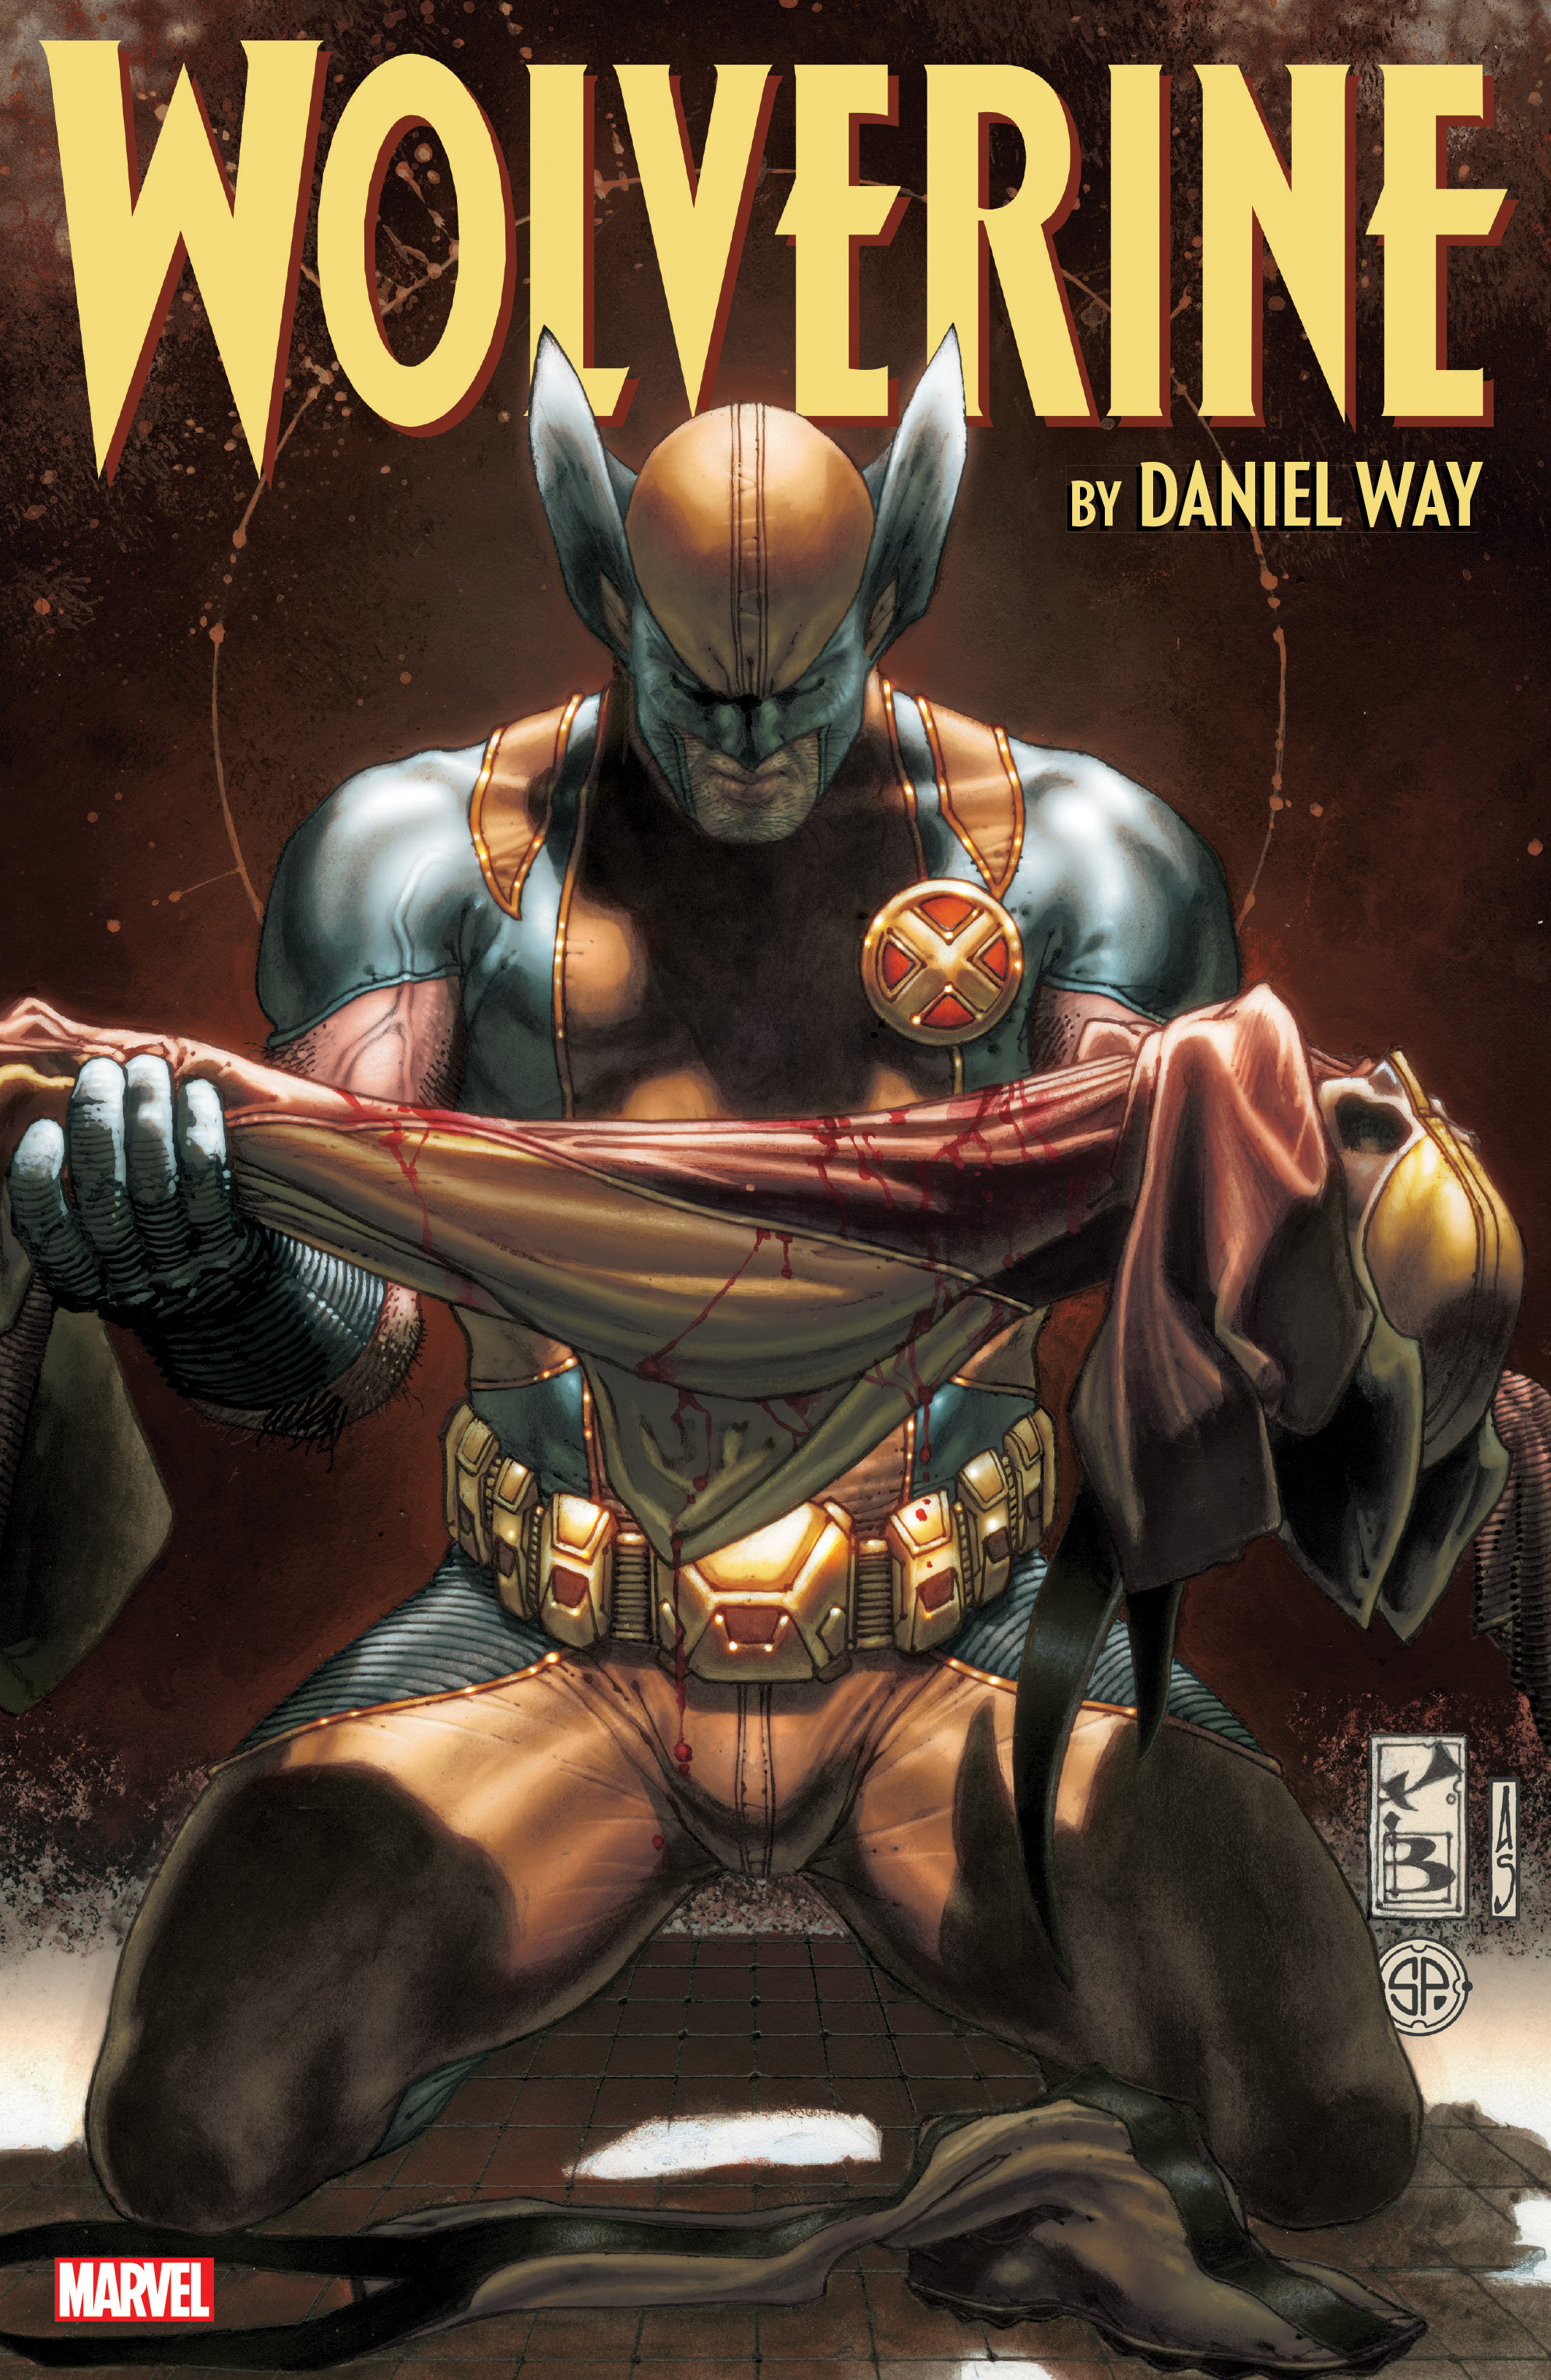 Wolverine by Daniel Way: The Complete Collection Vol. 4 (Trade Paperback)